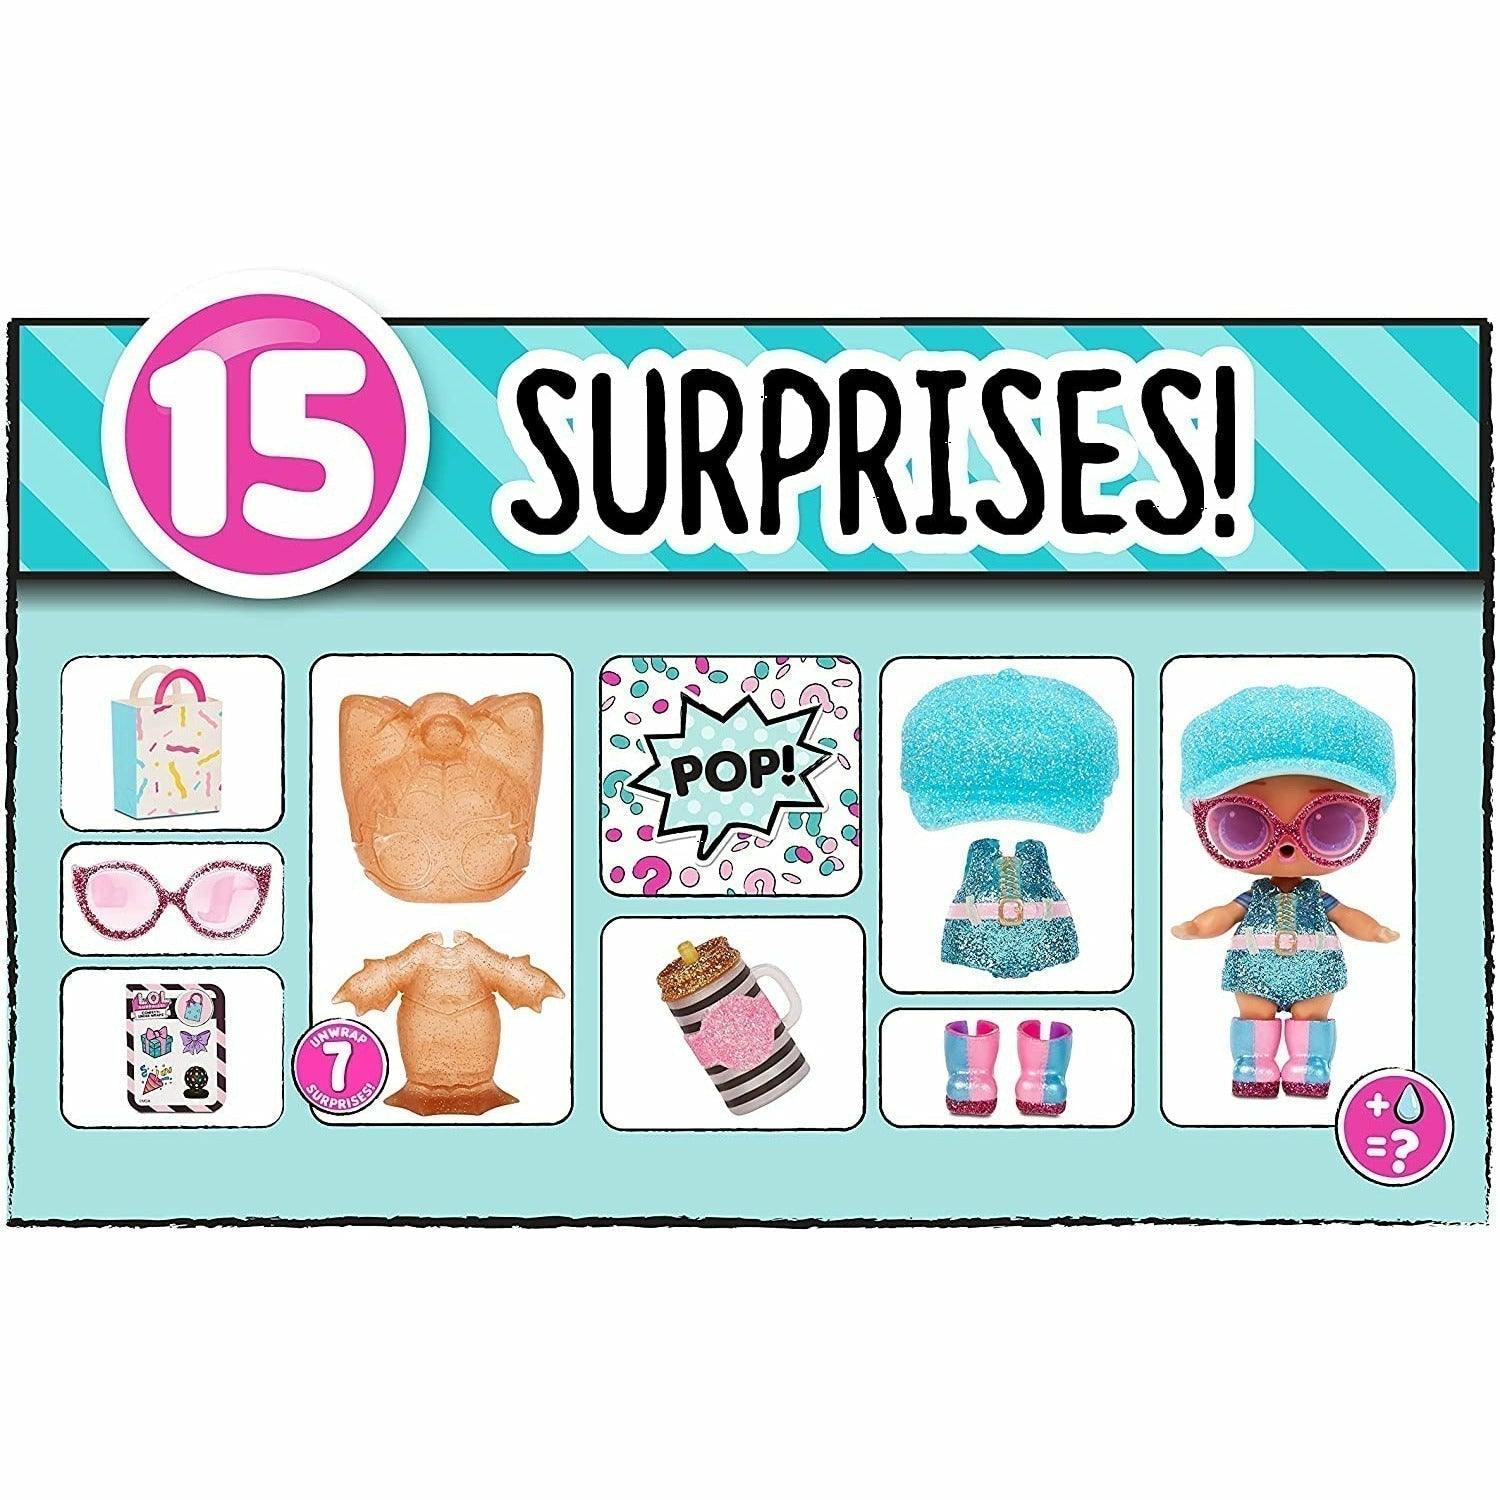 L.O.L Surprise Confetti Reveal Including Collectible Doll & Confetti Pop Fashion Outfits With 15 Surprises - BumbleToys - 5-7 Years, Dolls, Fashion Dolls & Accessories, Girls, L.O.L, OXE, Pre-Order